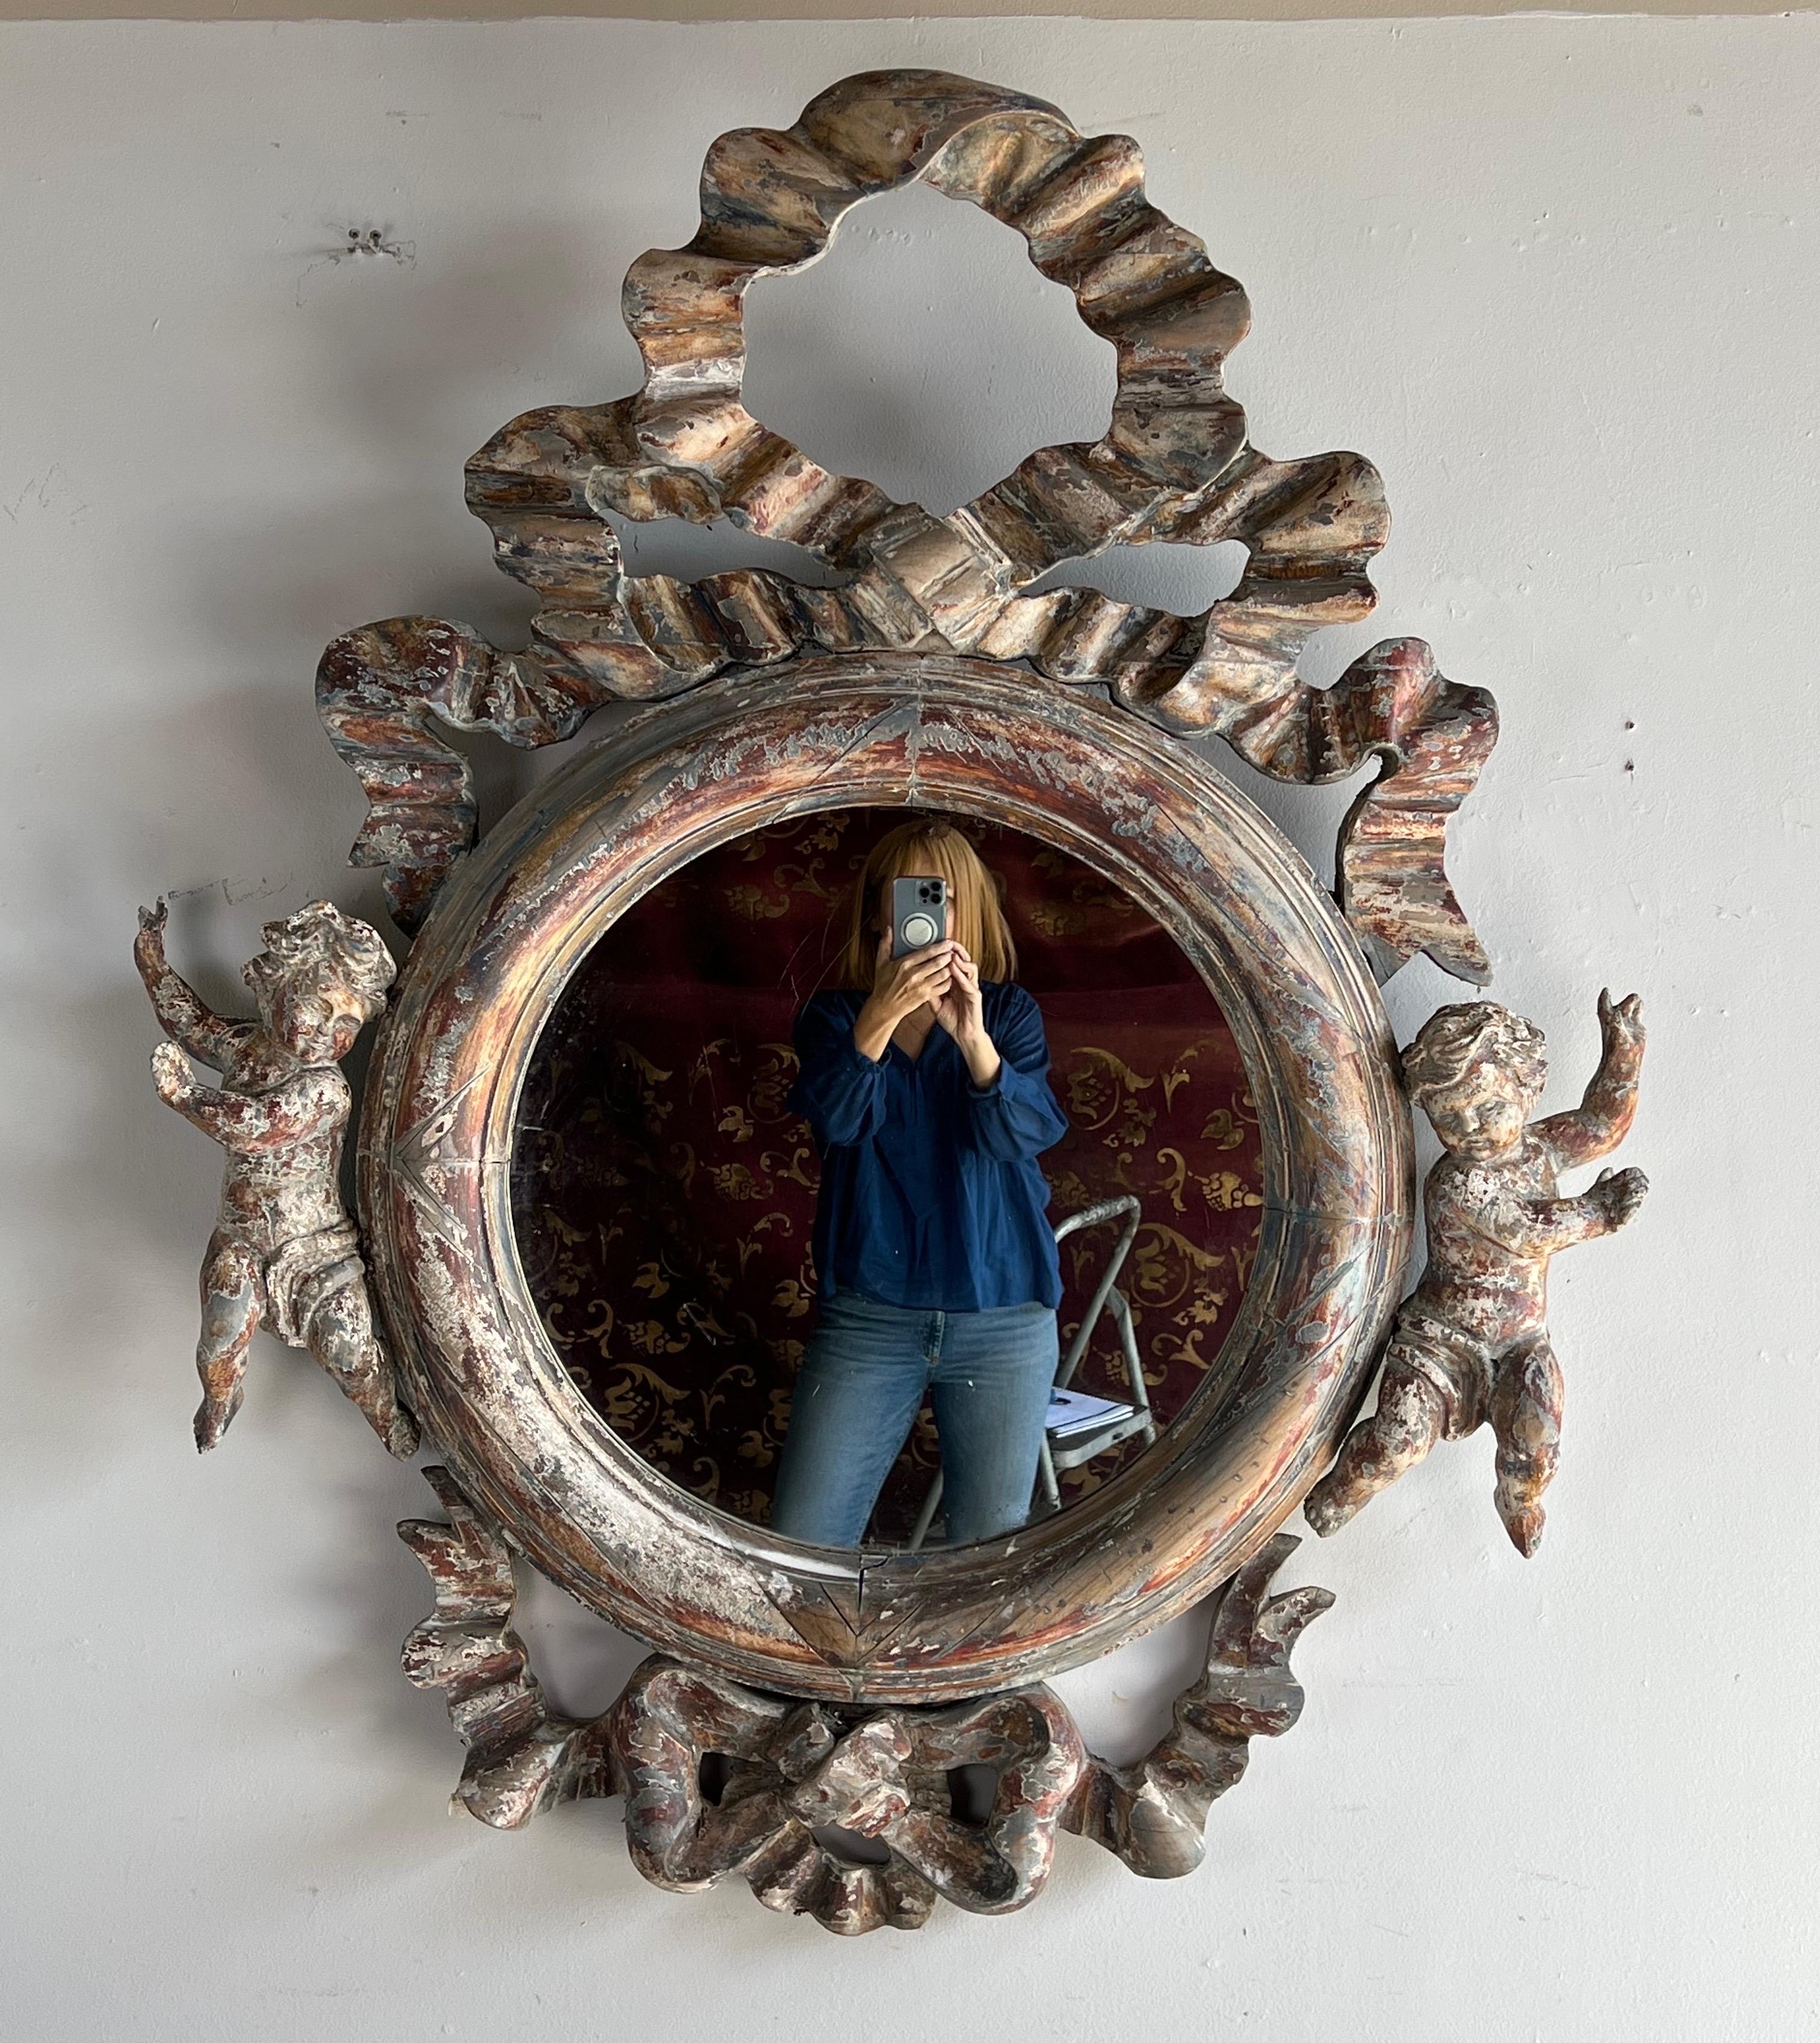 Monumental size French carved wood painted mirror. The mirror depicts a large bow with cascading ribbon and a charming cherubs flanking the sides. The worn painted finish has lovely shades of rust, blue, cream & gray. The natural wood also shows